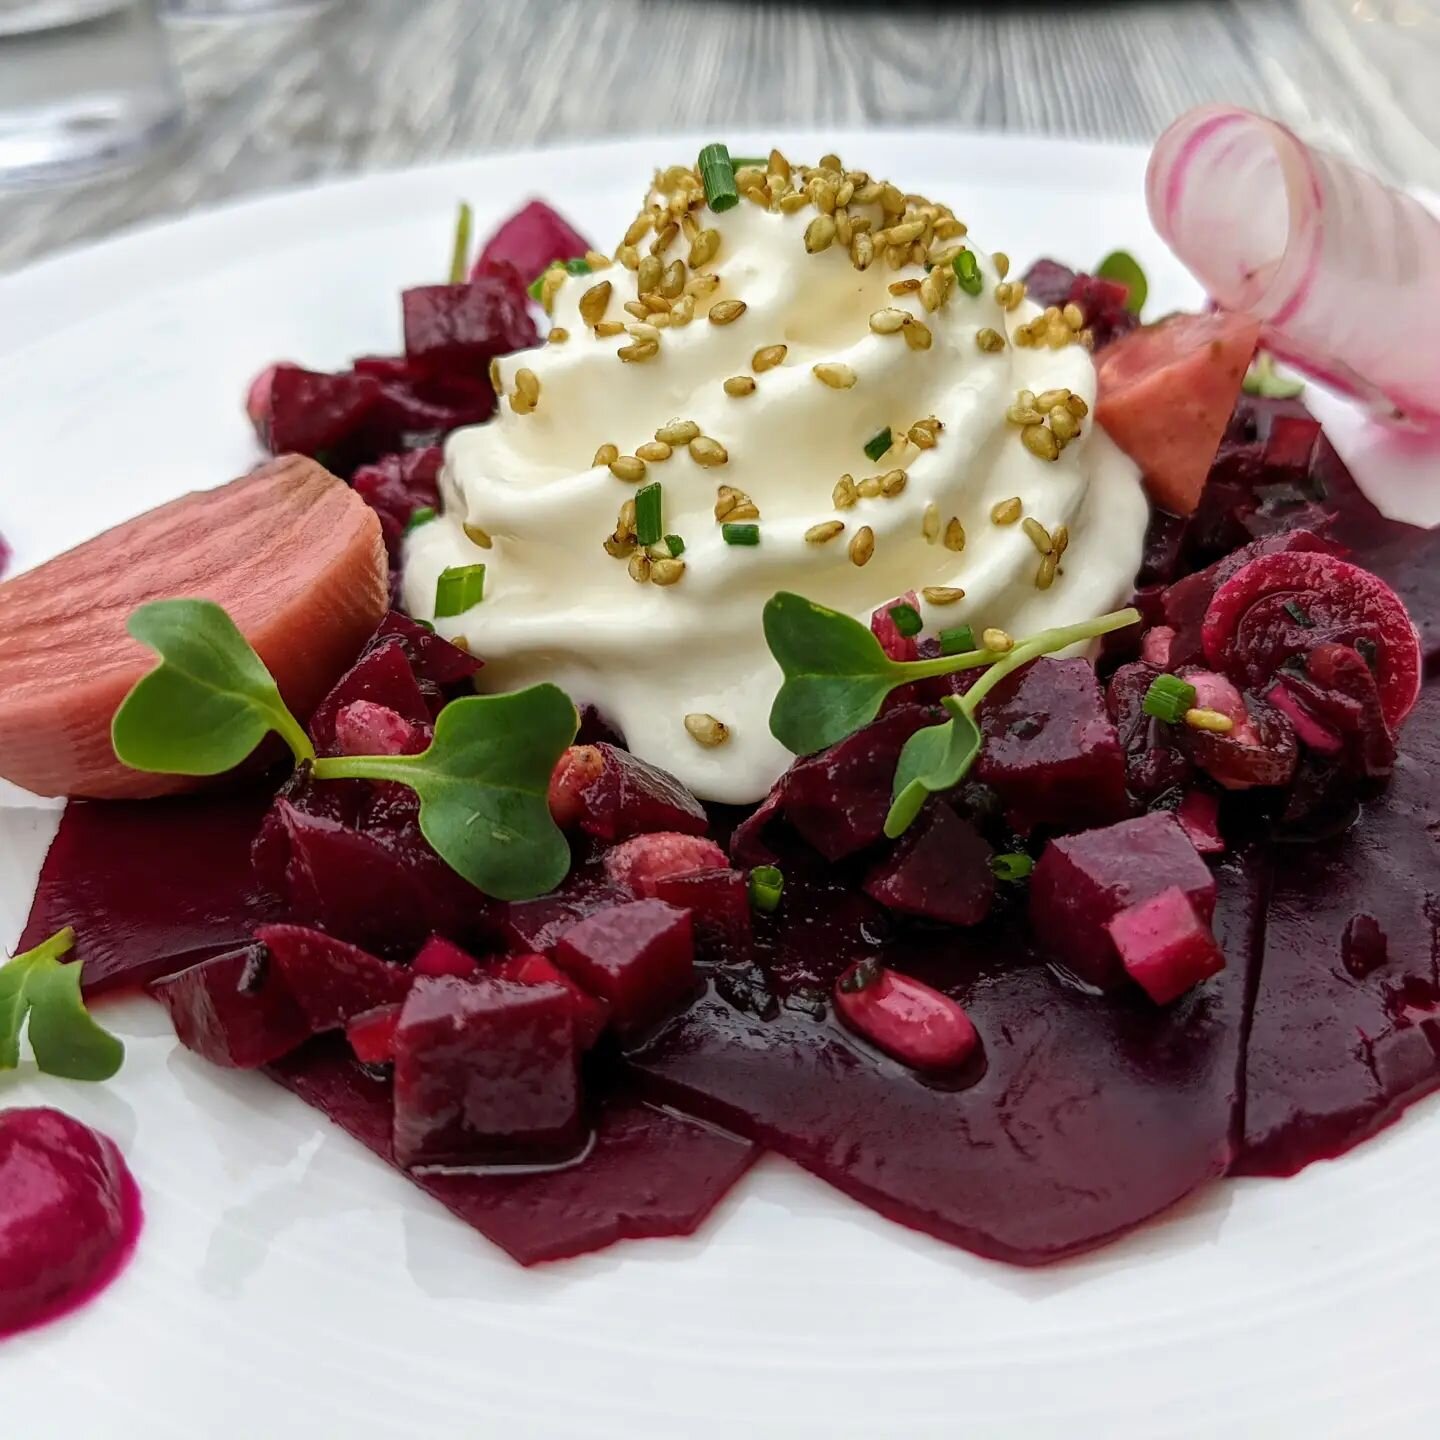 Goat cheese cream and beet carpaccio salad at Le Terminus in Ruoms, Ard&egrave;che Valley. Divine!
#chevre 
#goatcheese
#cookingwithaftenchtwist
#provence 
#bettrave 
#salade
#ardeche 
#ard&egrave;che 
#france 
#france🇫🇷 
#ardechesecrete